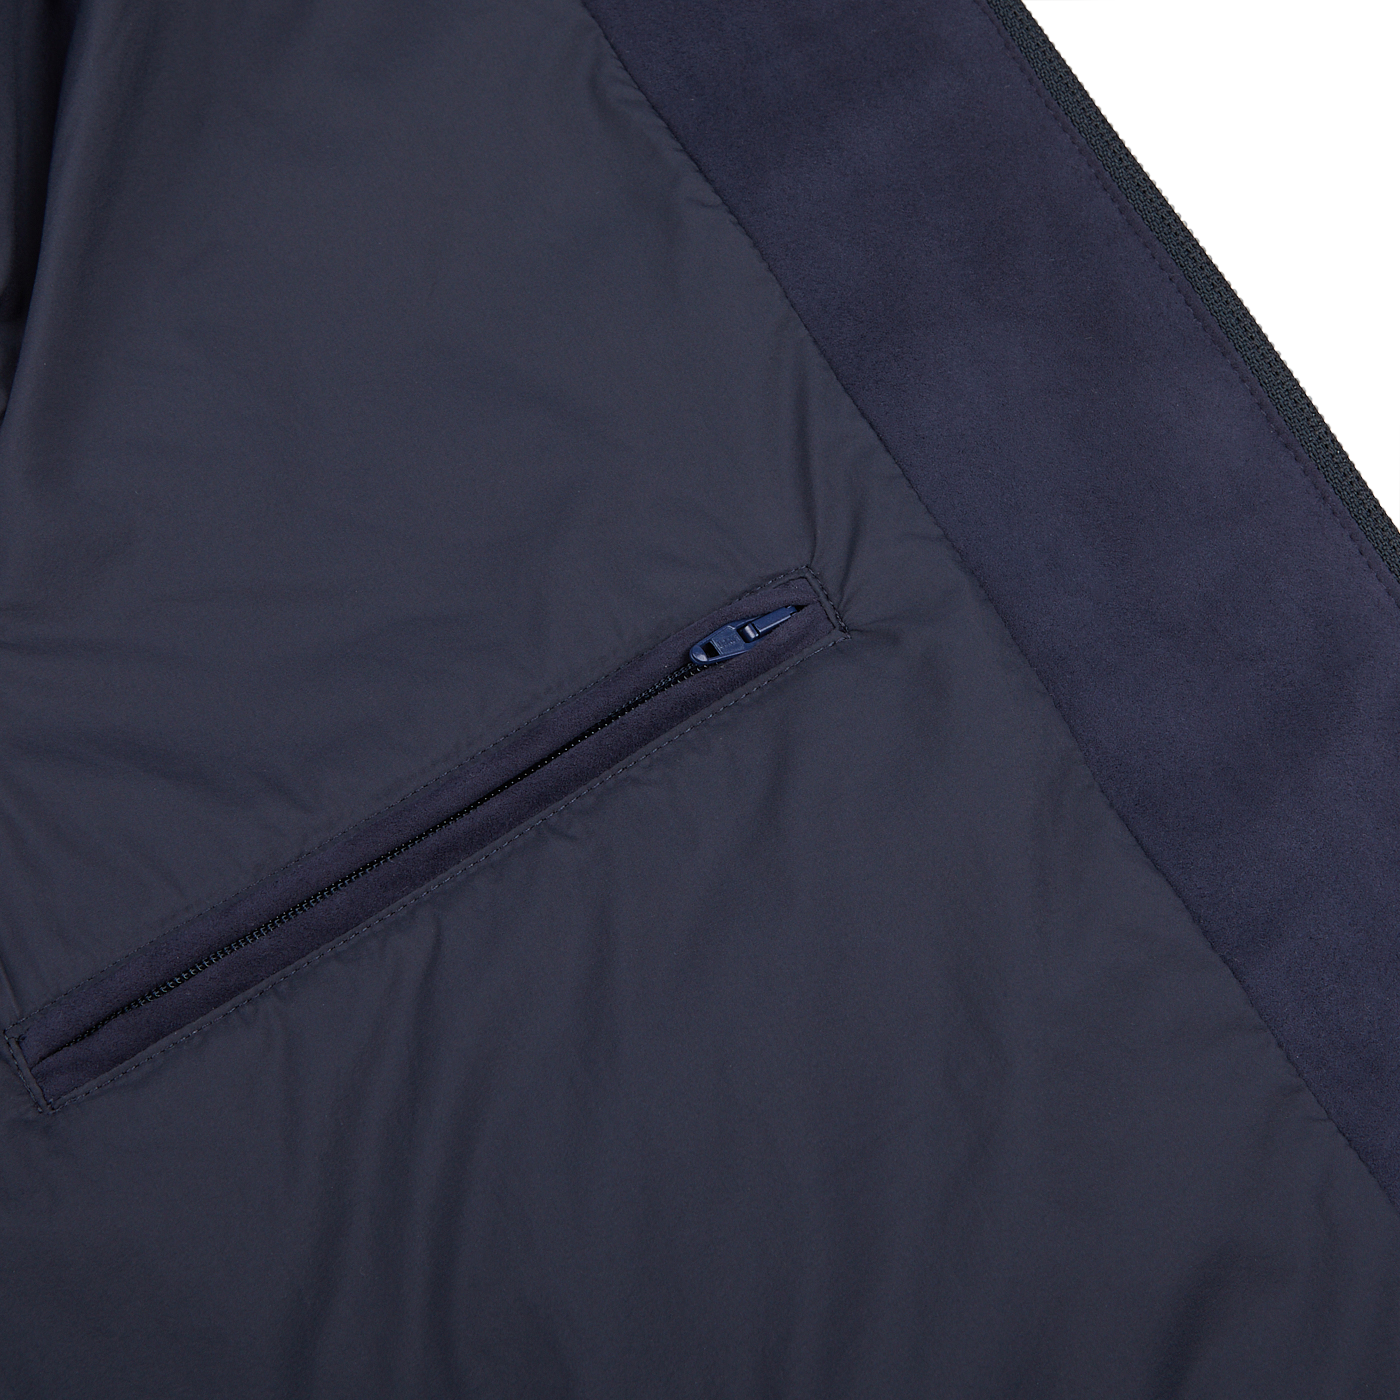 Close-up view of a Herno Navy Blue Suede Alcantara Zip Gilet showing an interior pocket with a zip closure, featuring technical down for added warmth.